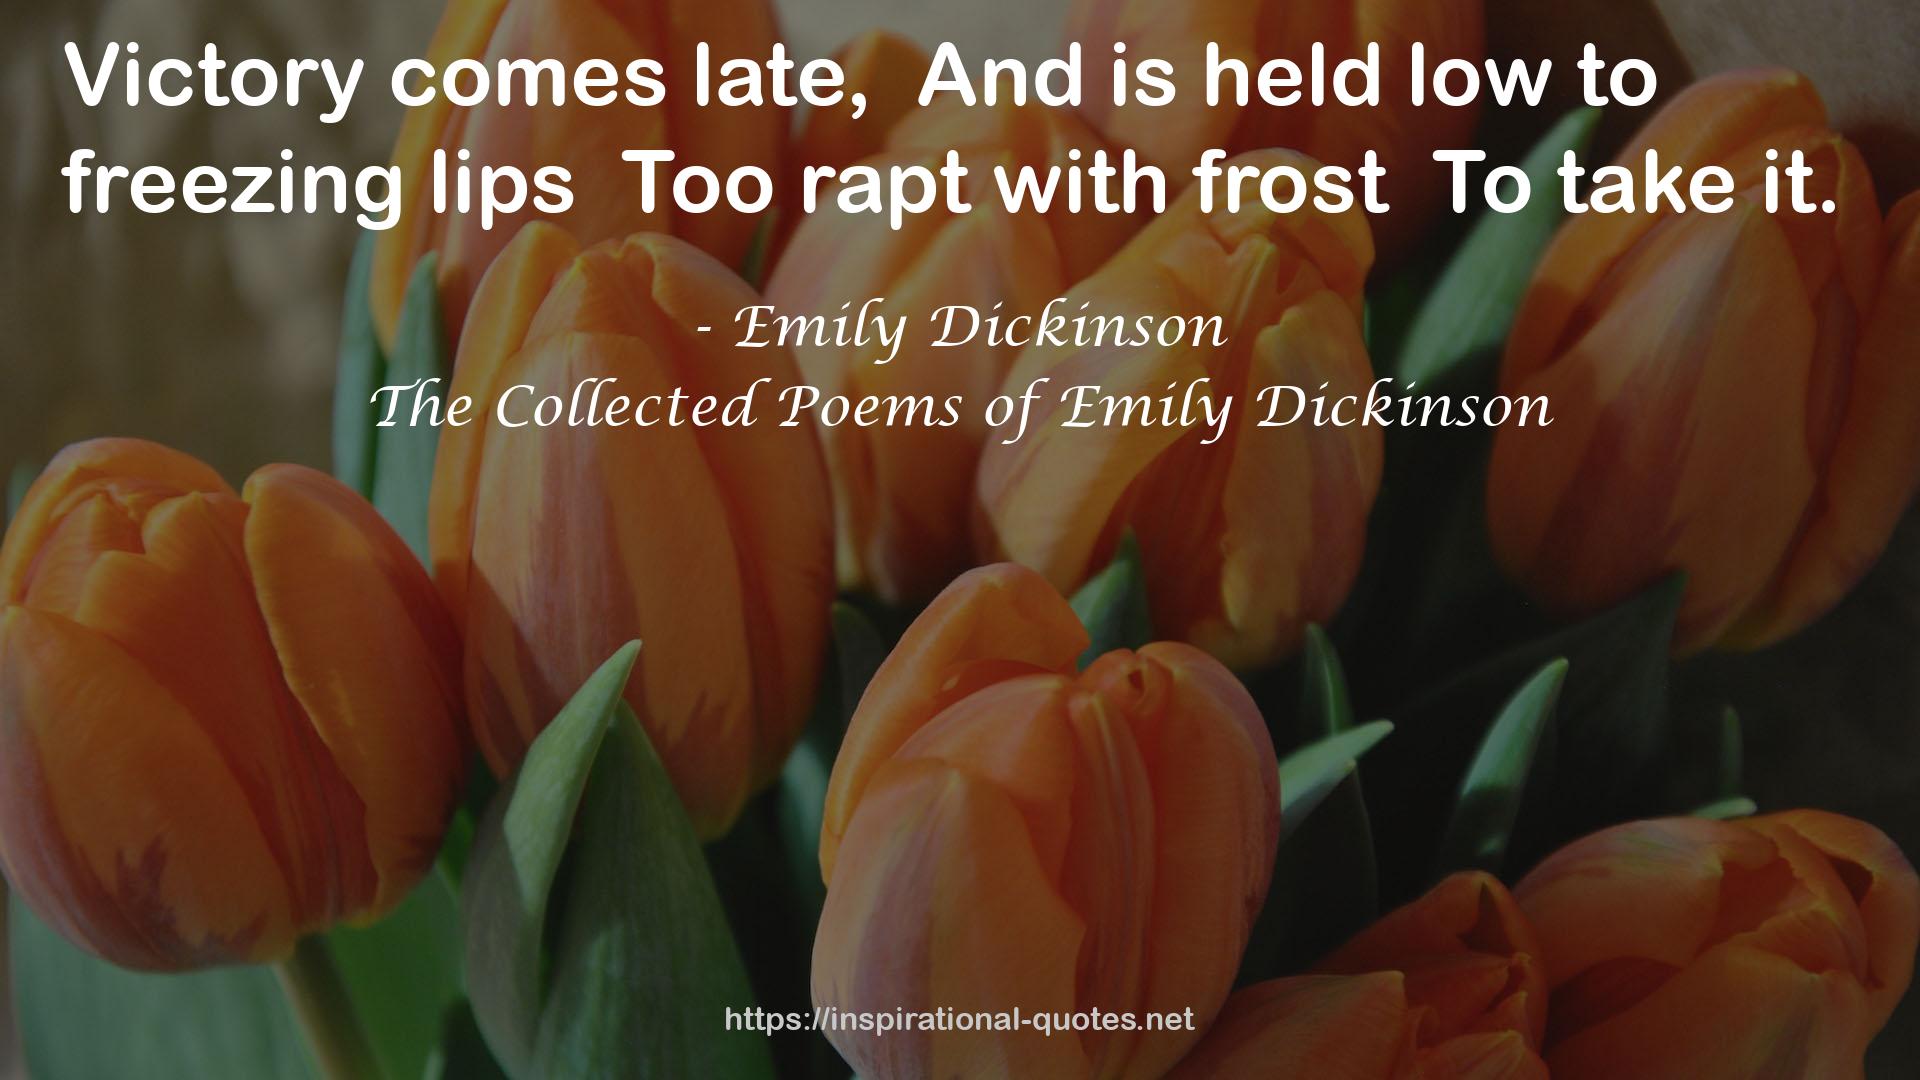 The Collected Poems of Emily Dickinson QUOTES